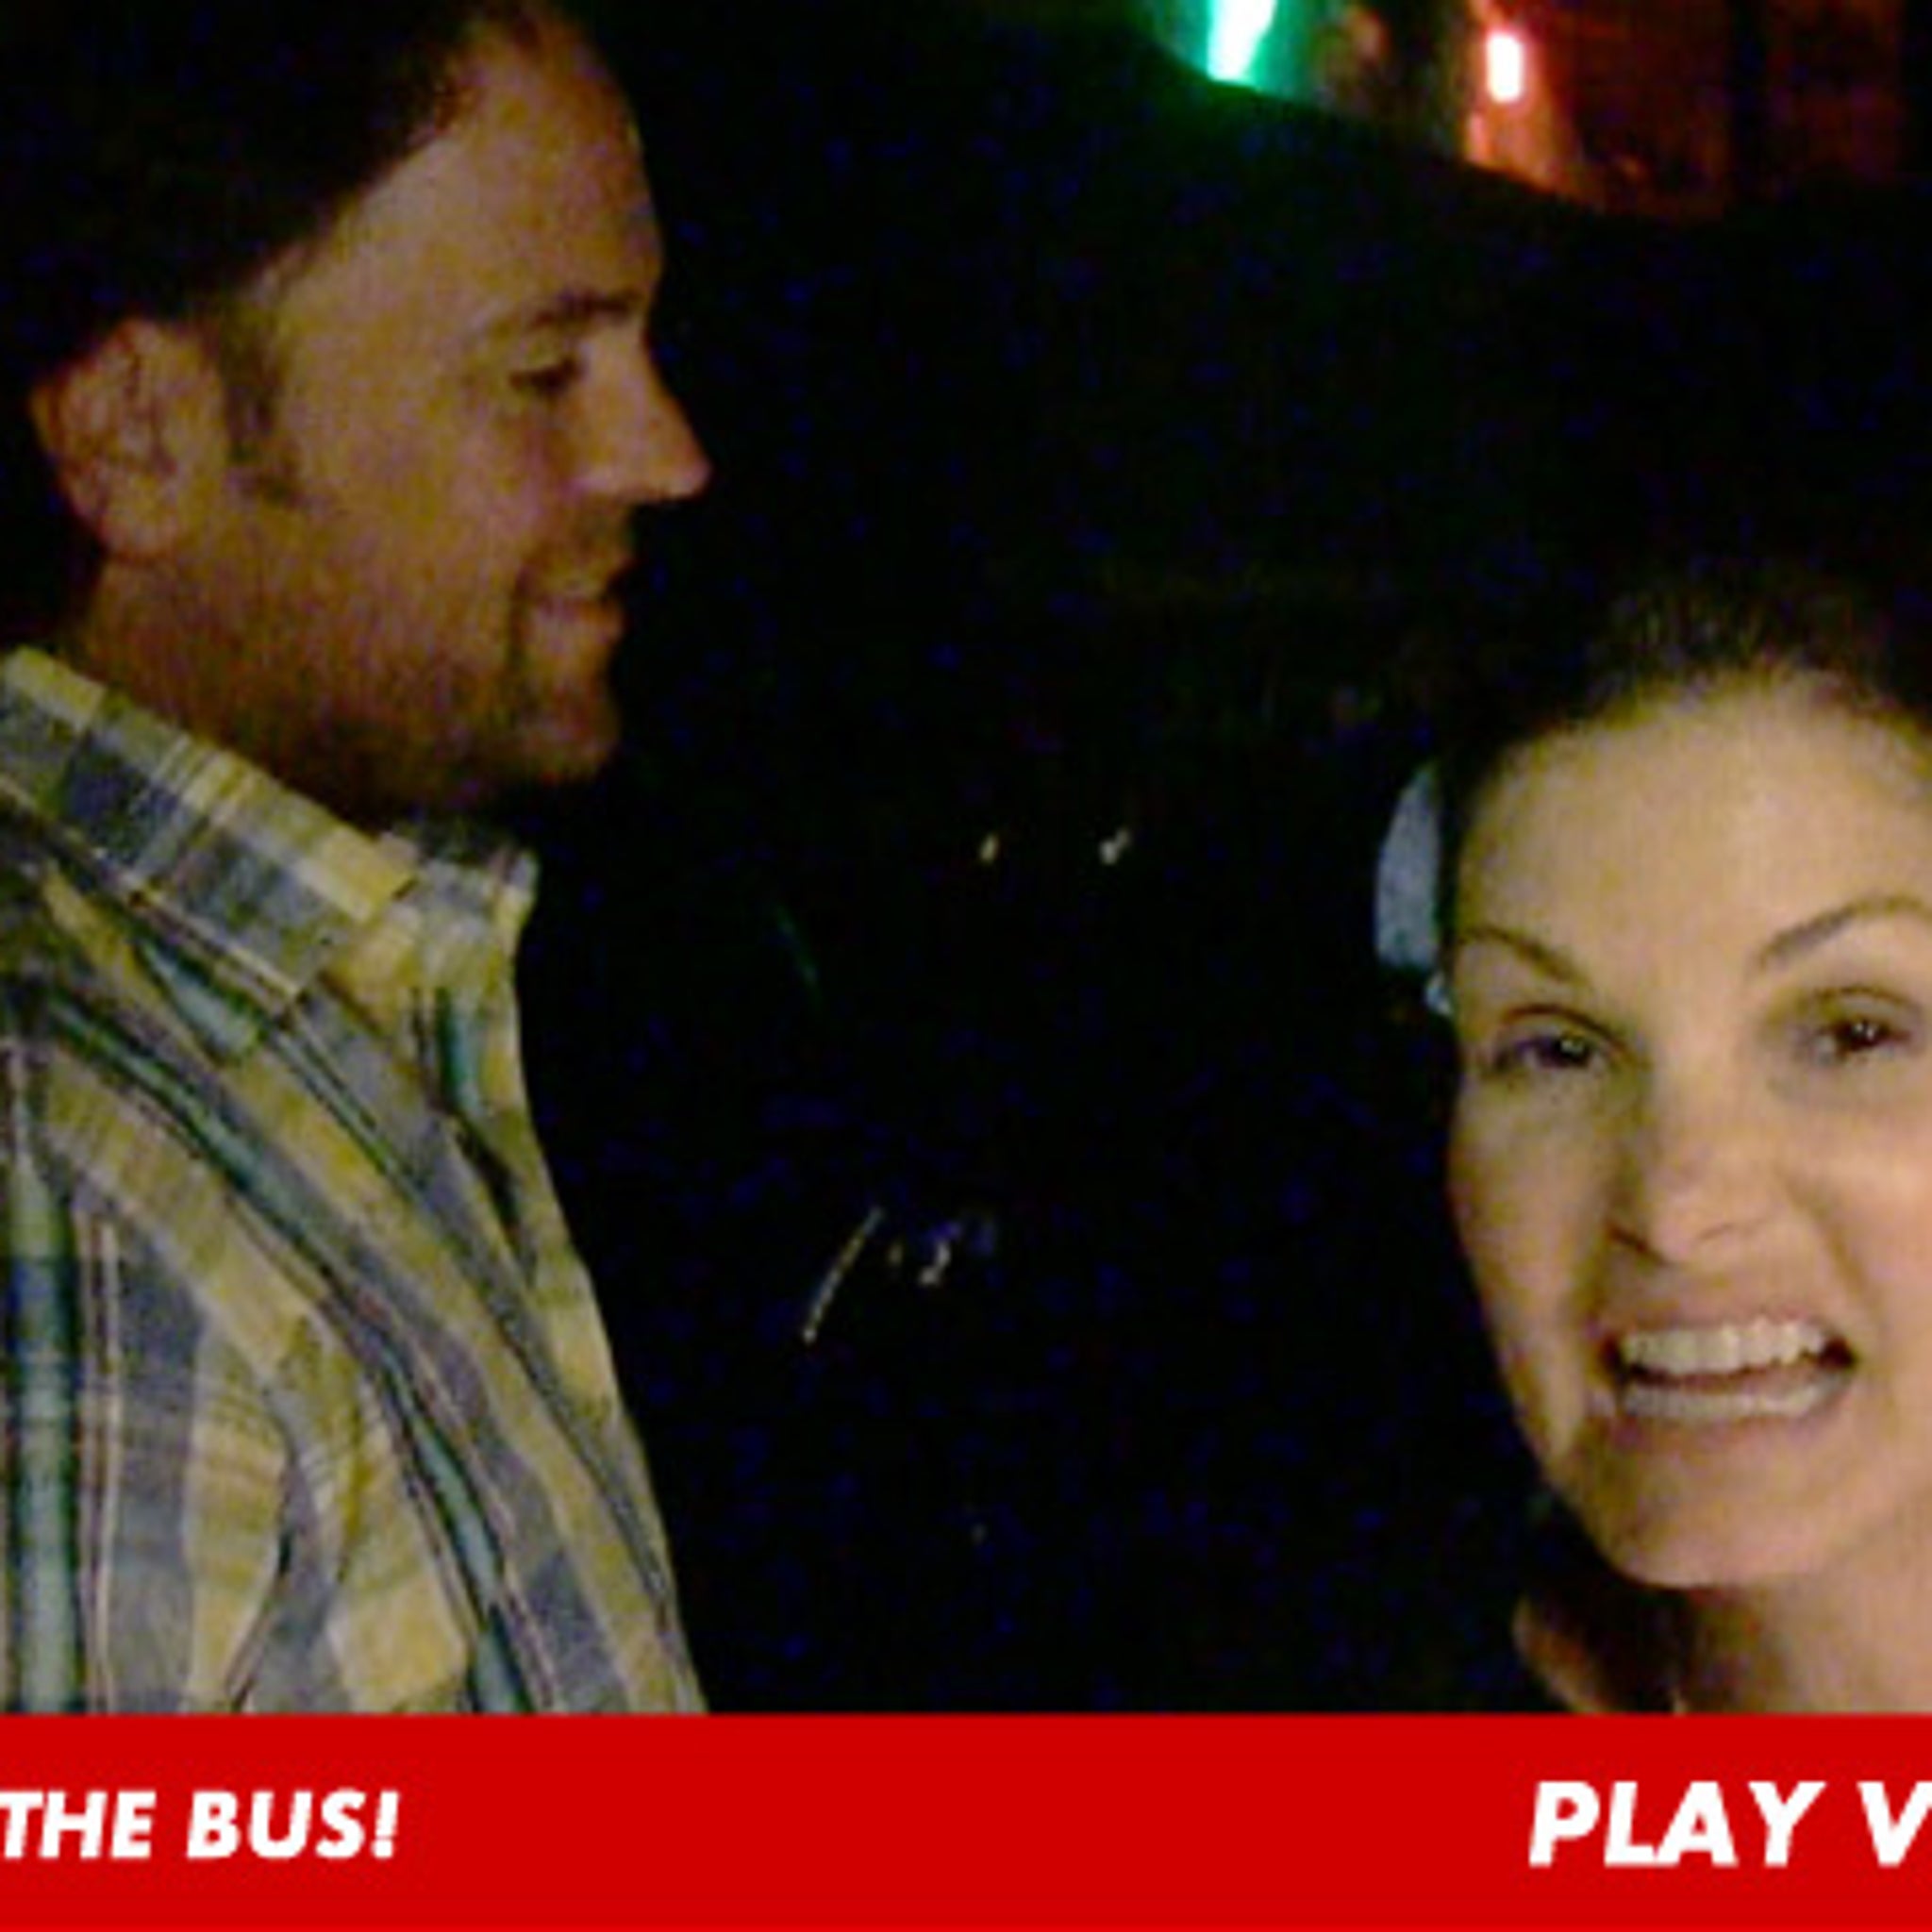 Mike Piazzas Wife -- Roger Clemens World Series Bat Attack Was Steroid-Fueled